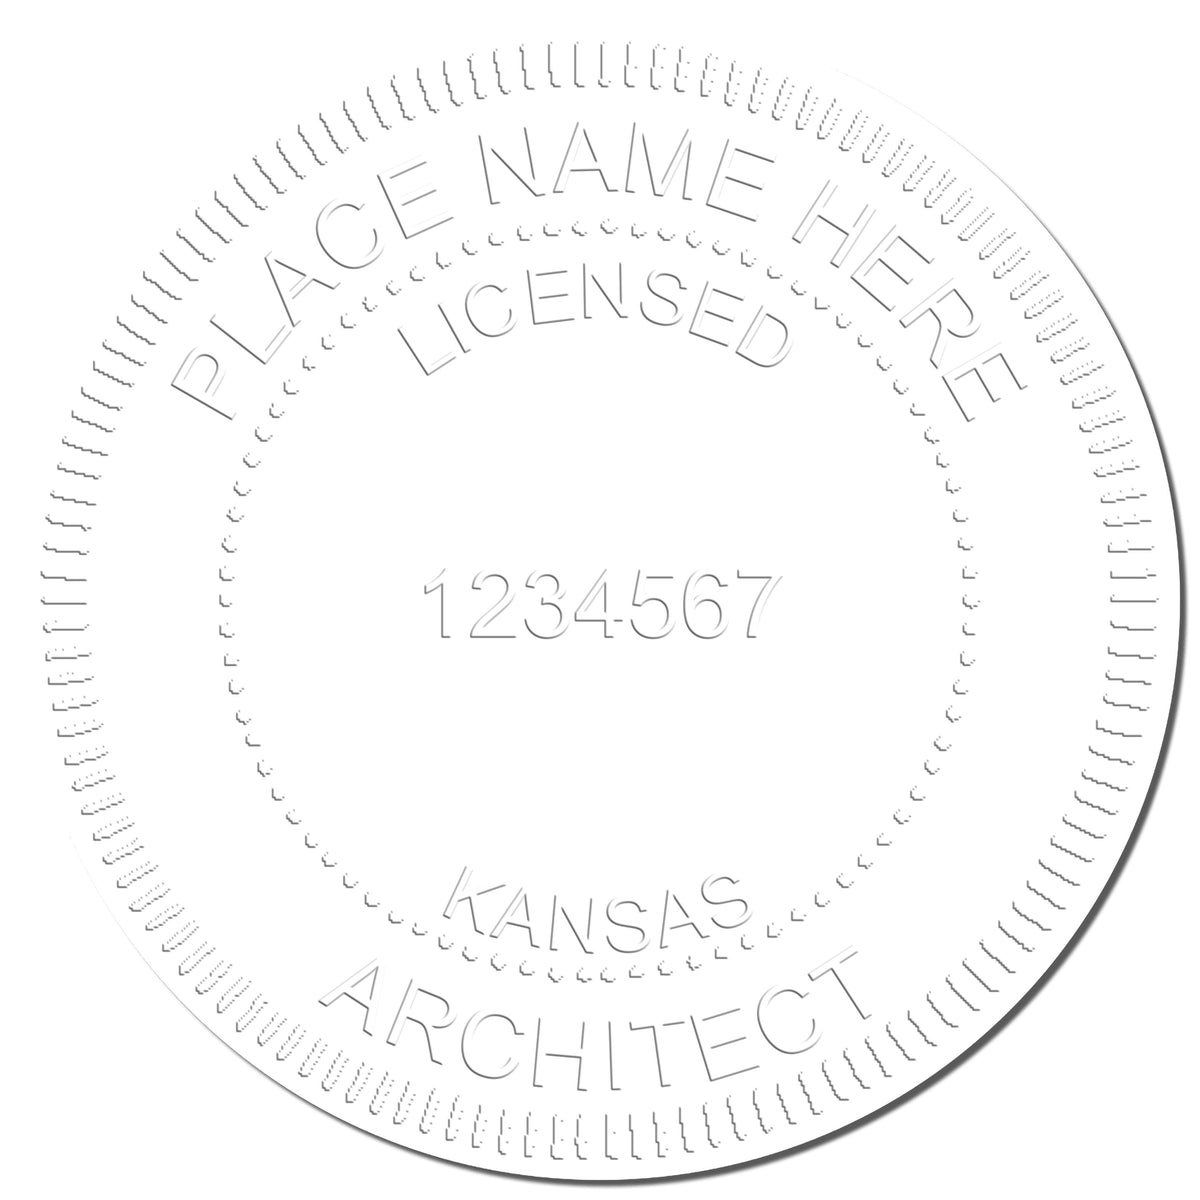 A photograph of the Handheld Kansas Architect Seal Embosser stamp impression reveals a vivid, professional image of the on paper.